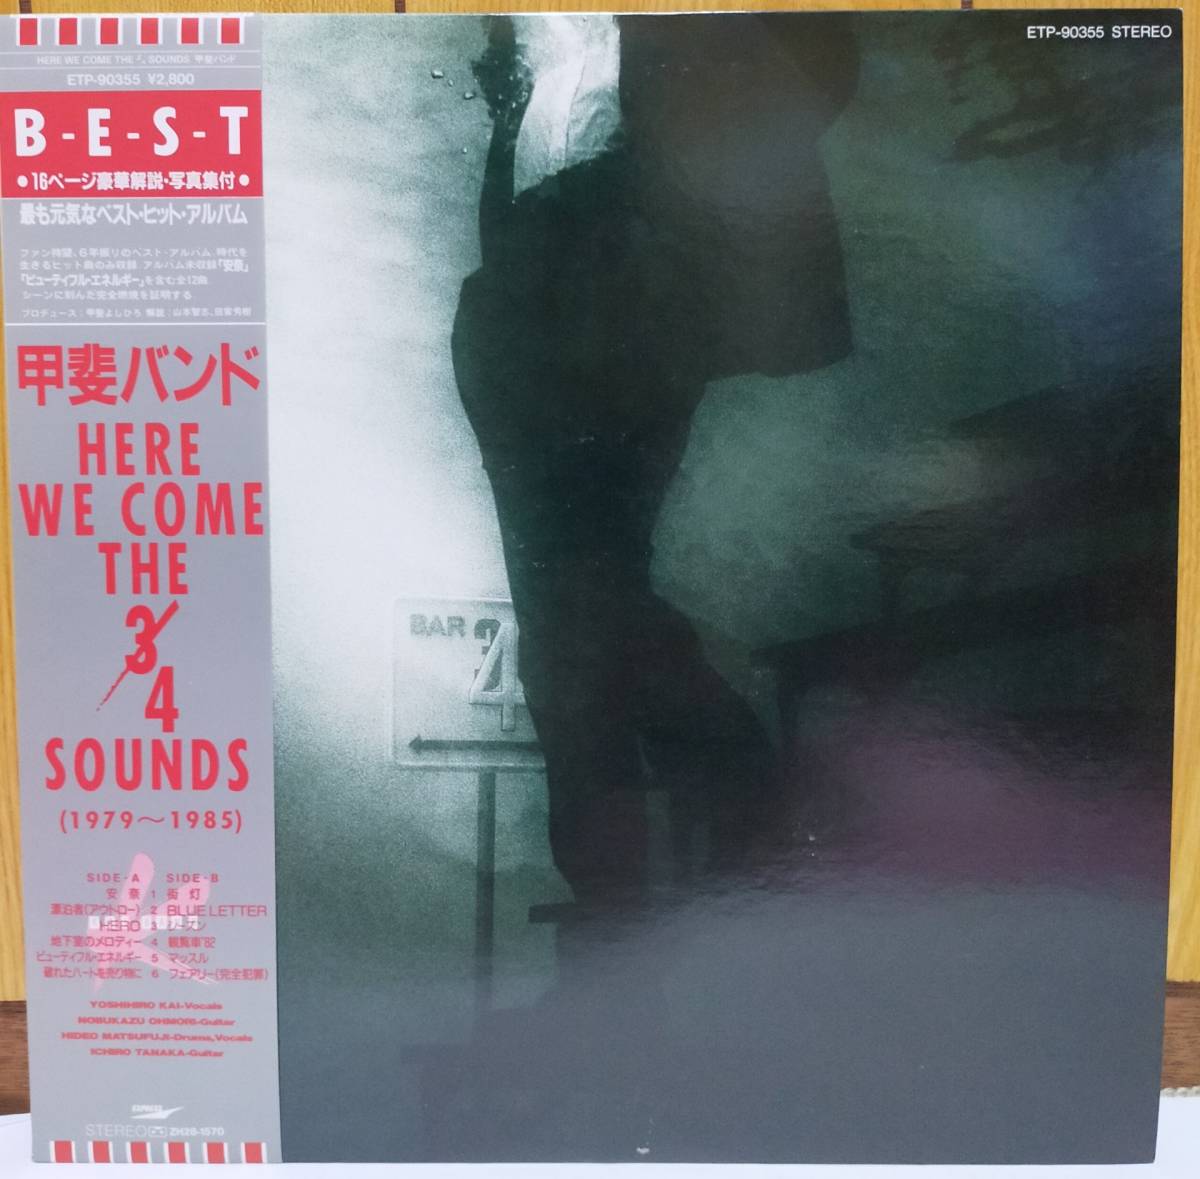 ☆LP 甲斐バンド / Here We Come The 3 4 Sounds ETP-90355 ☆_画像1